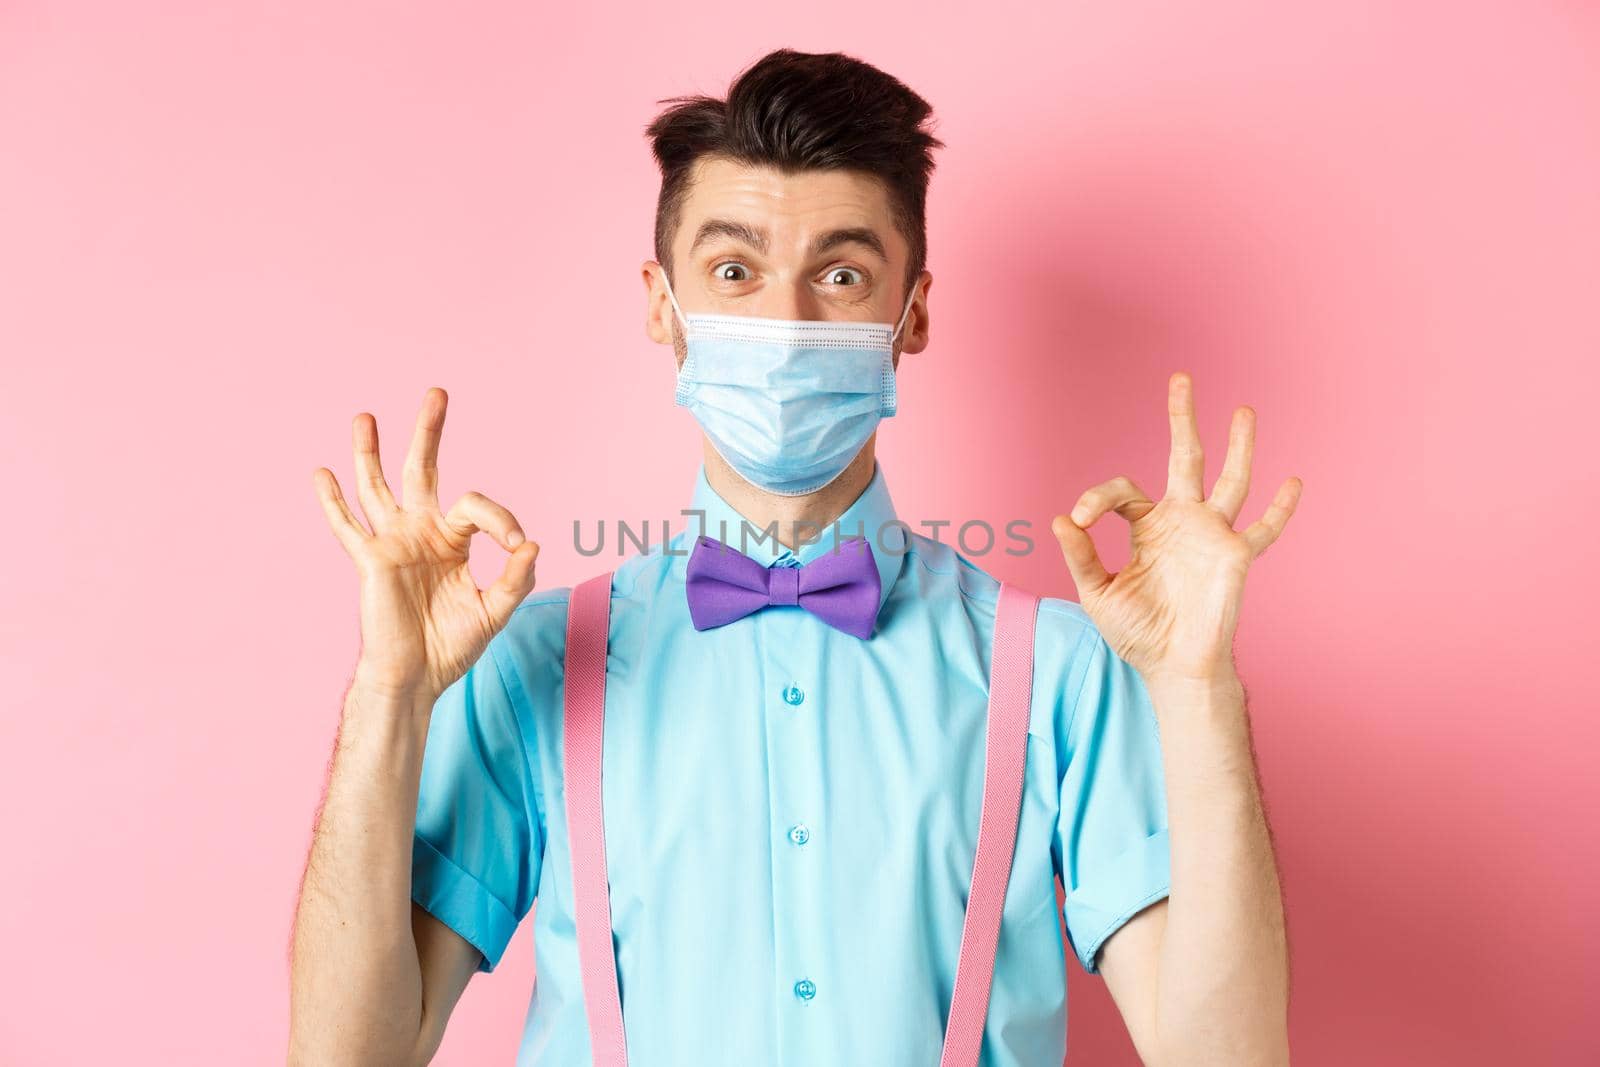 Coronavirus, healthcare and quarantine concept. Happy guy in medical mask and festive bow-tie showing all good gesture, make okay signs and smile at camera, pink background.